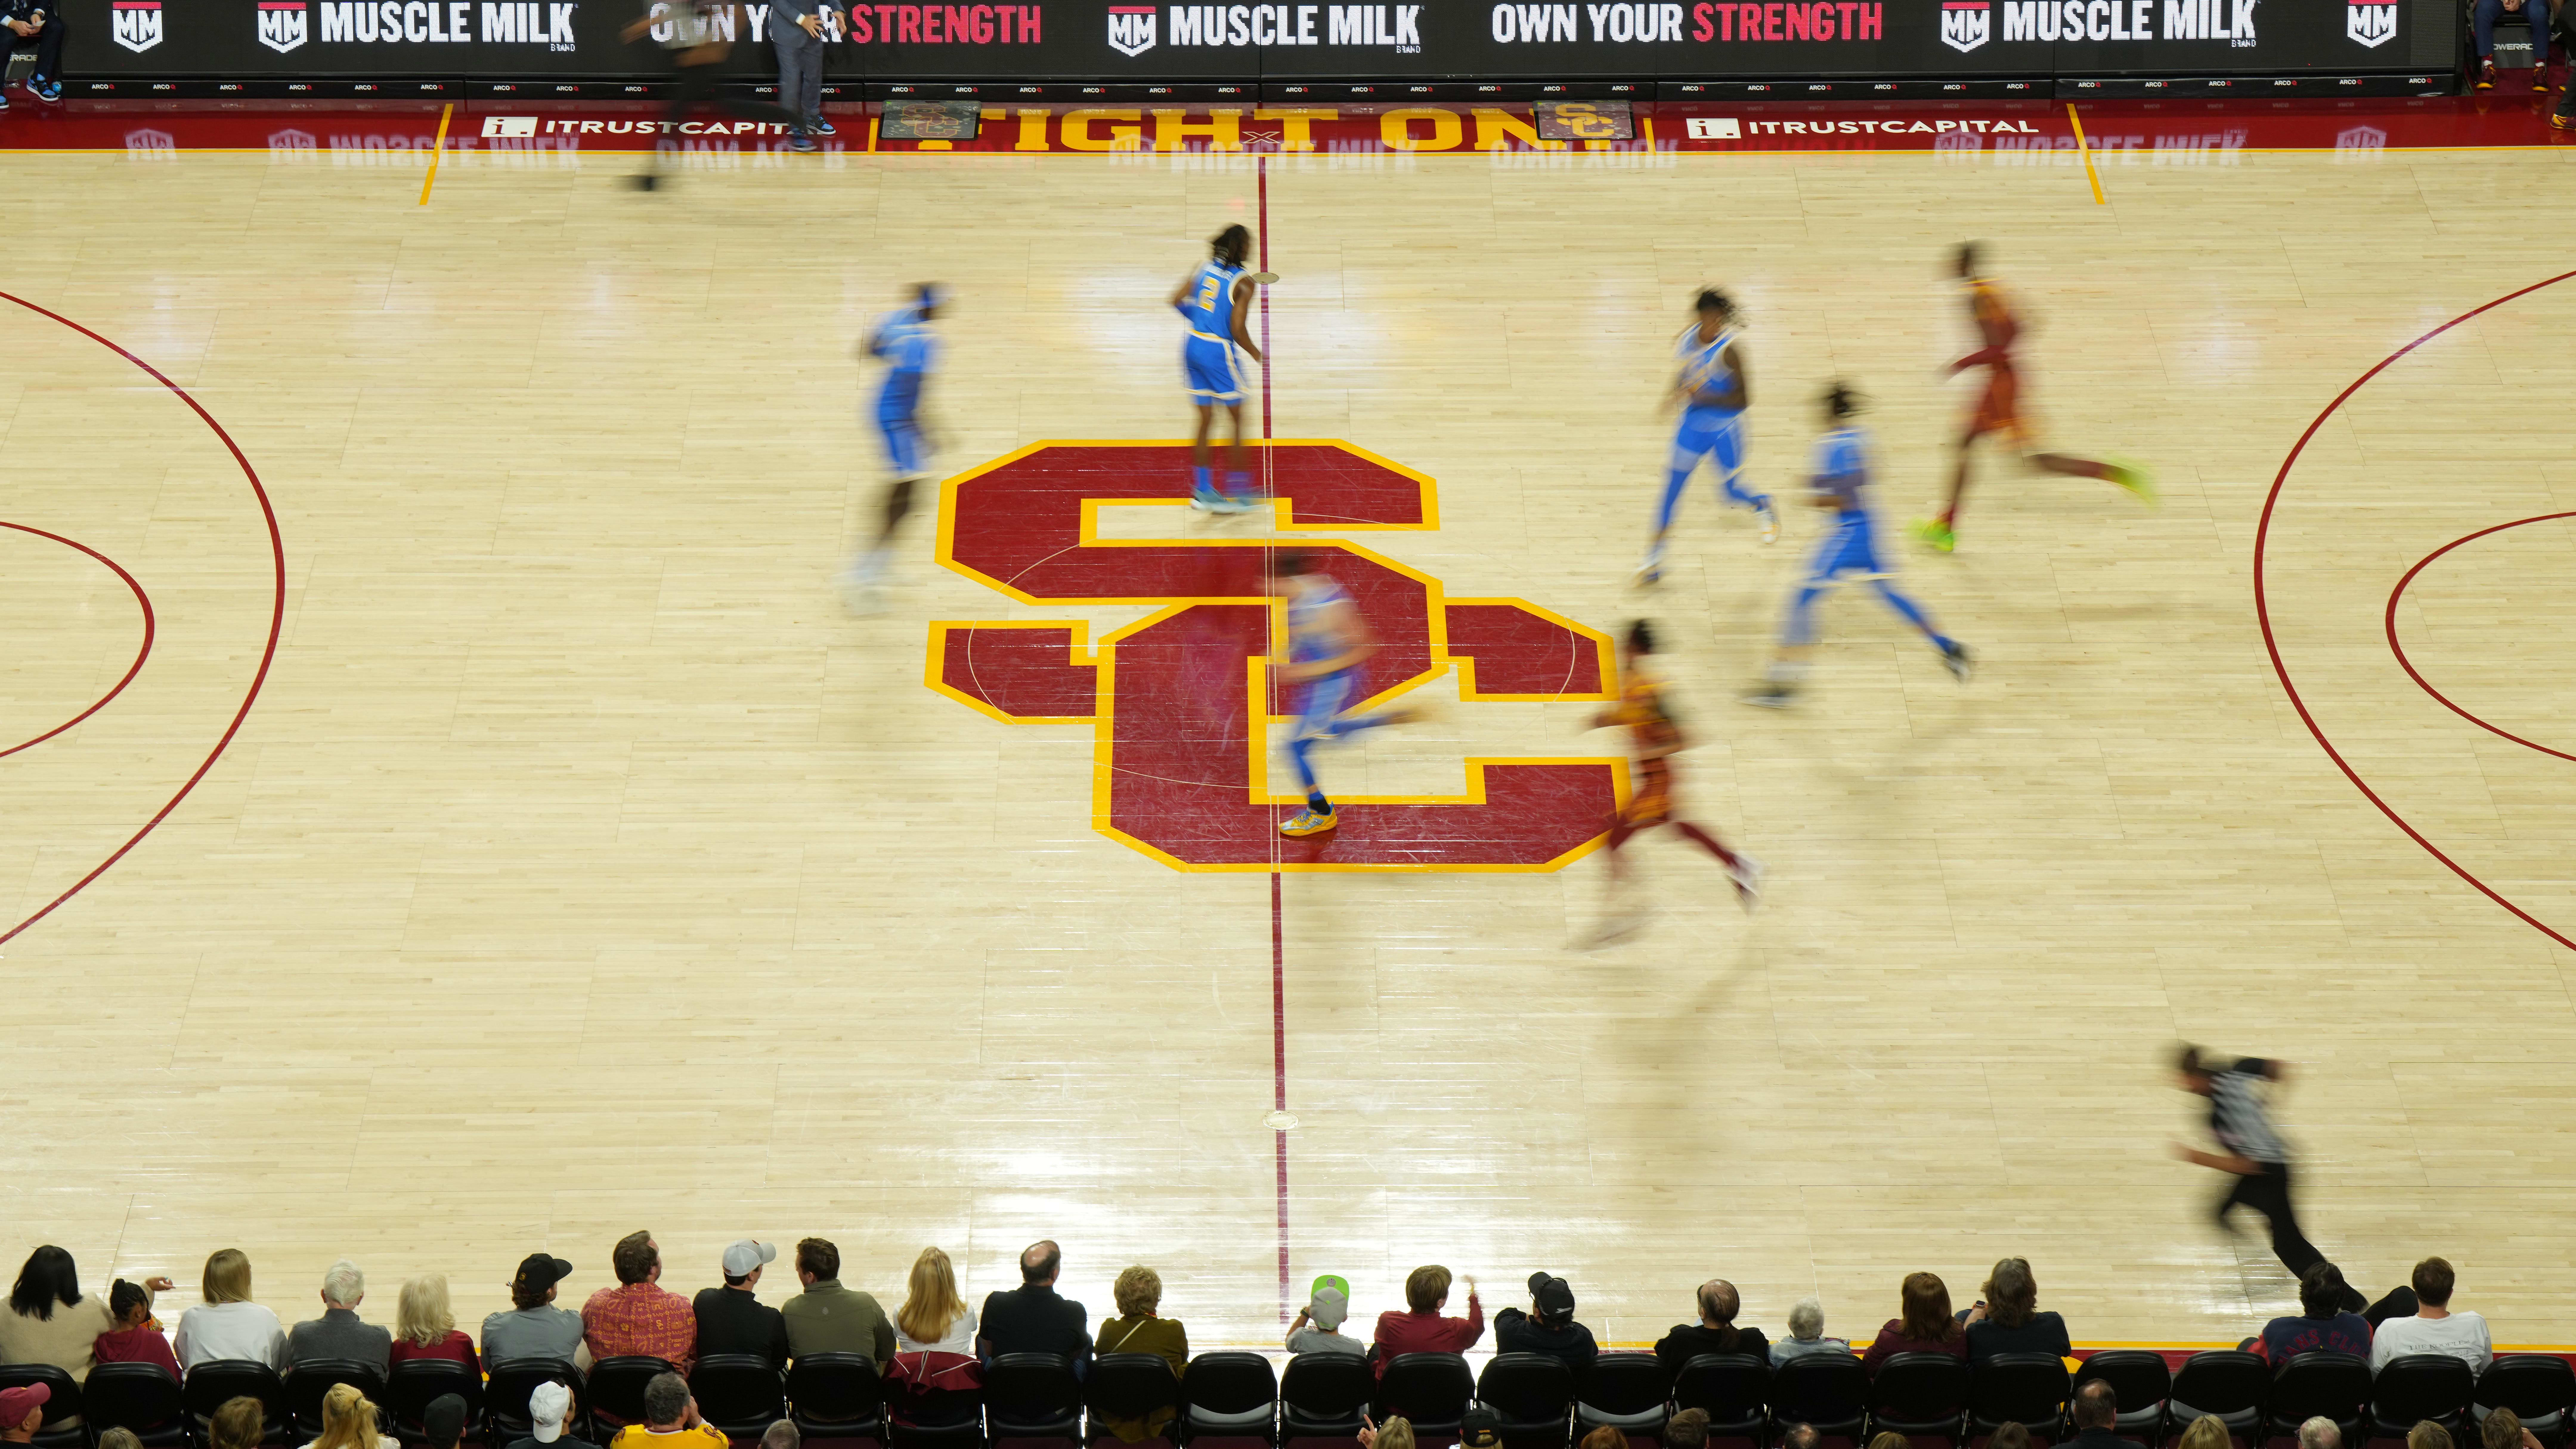 USC Basketball: 10-Year Andy Enfield Assistant Coach Departing Trojans, Too